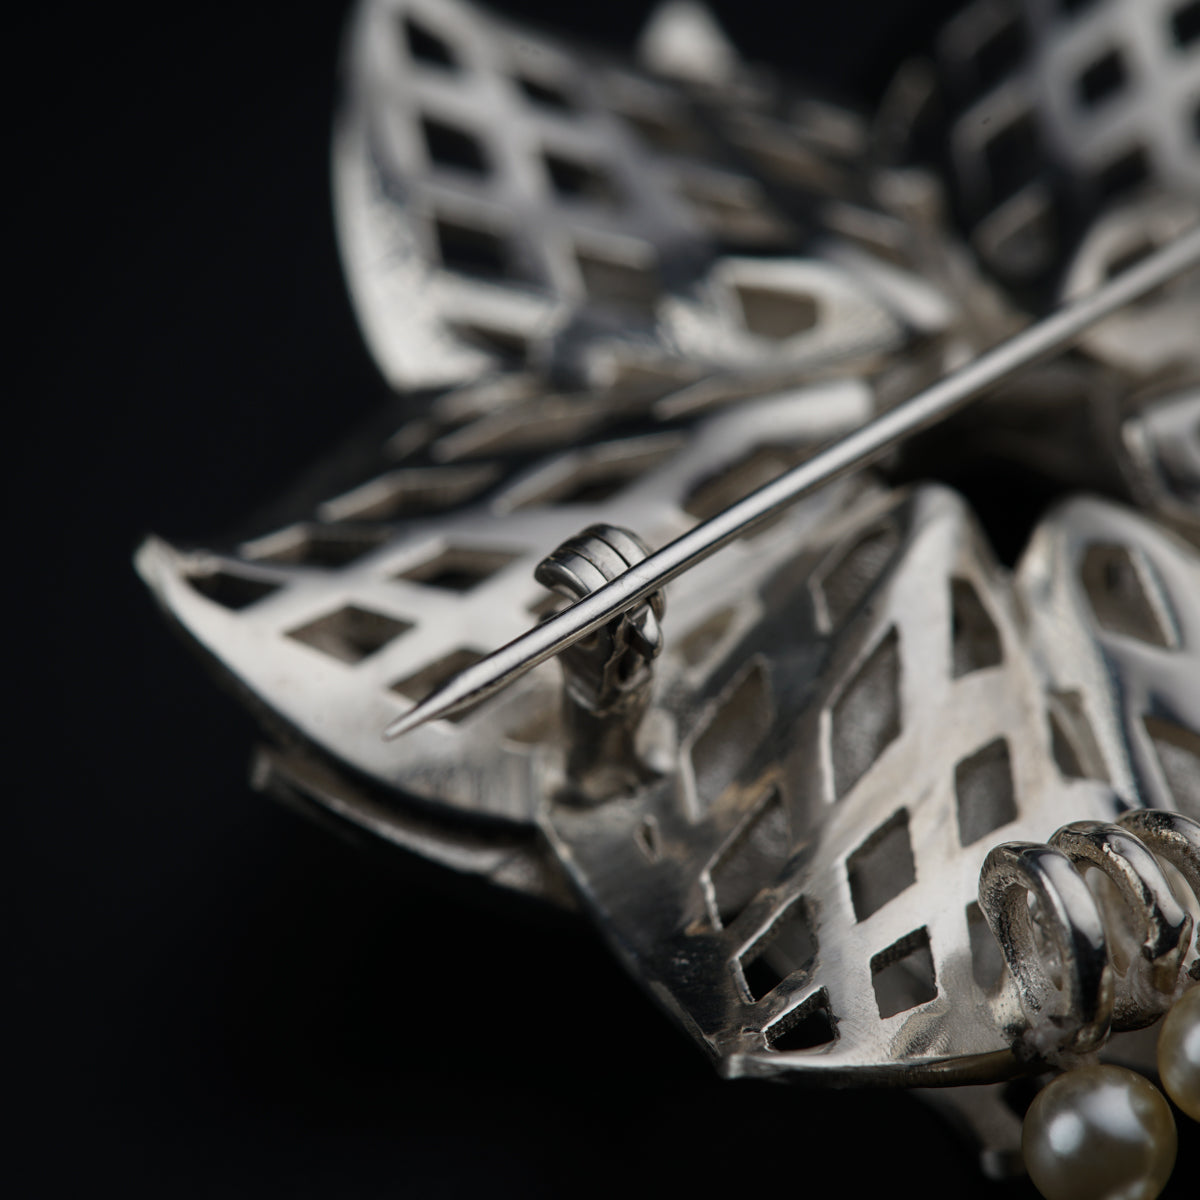 a close up of a metal object with pearls